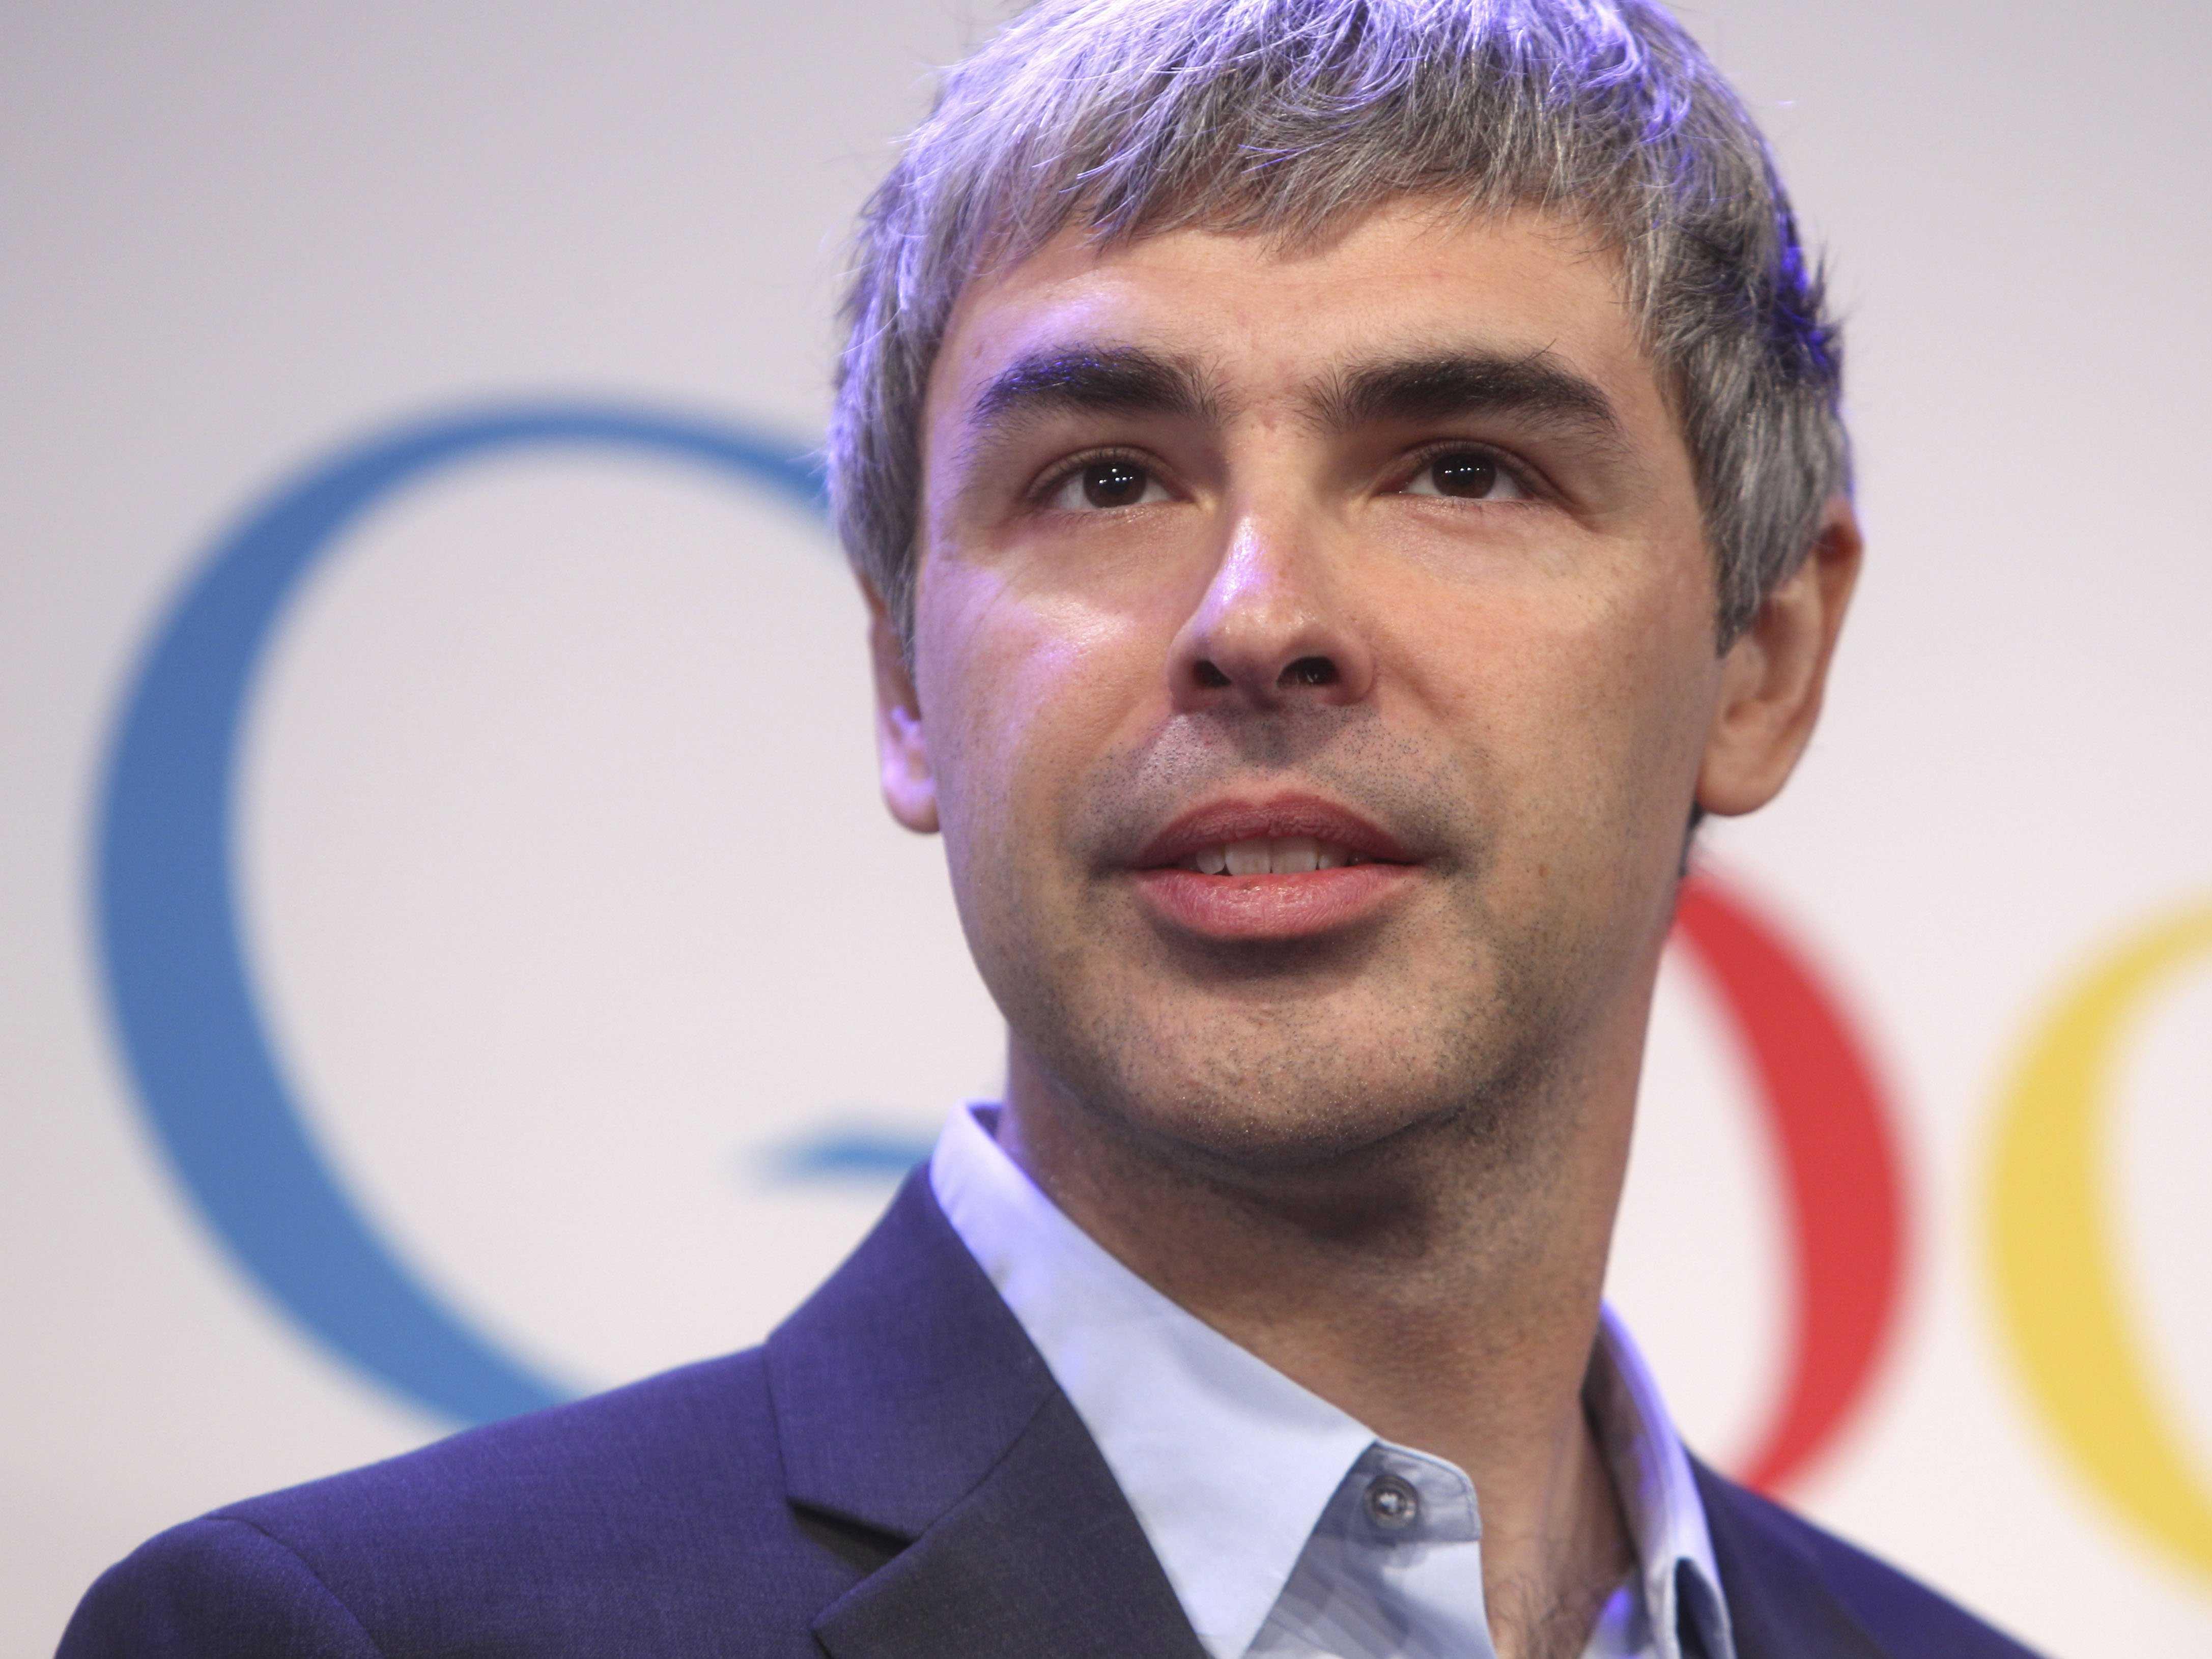 Larry Page Slams Silicon Valley, Says It's Not Chasing Big Enough